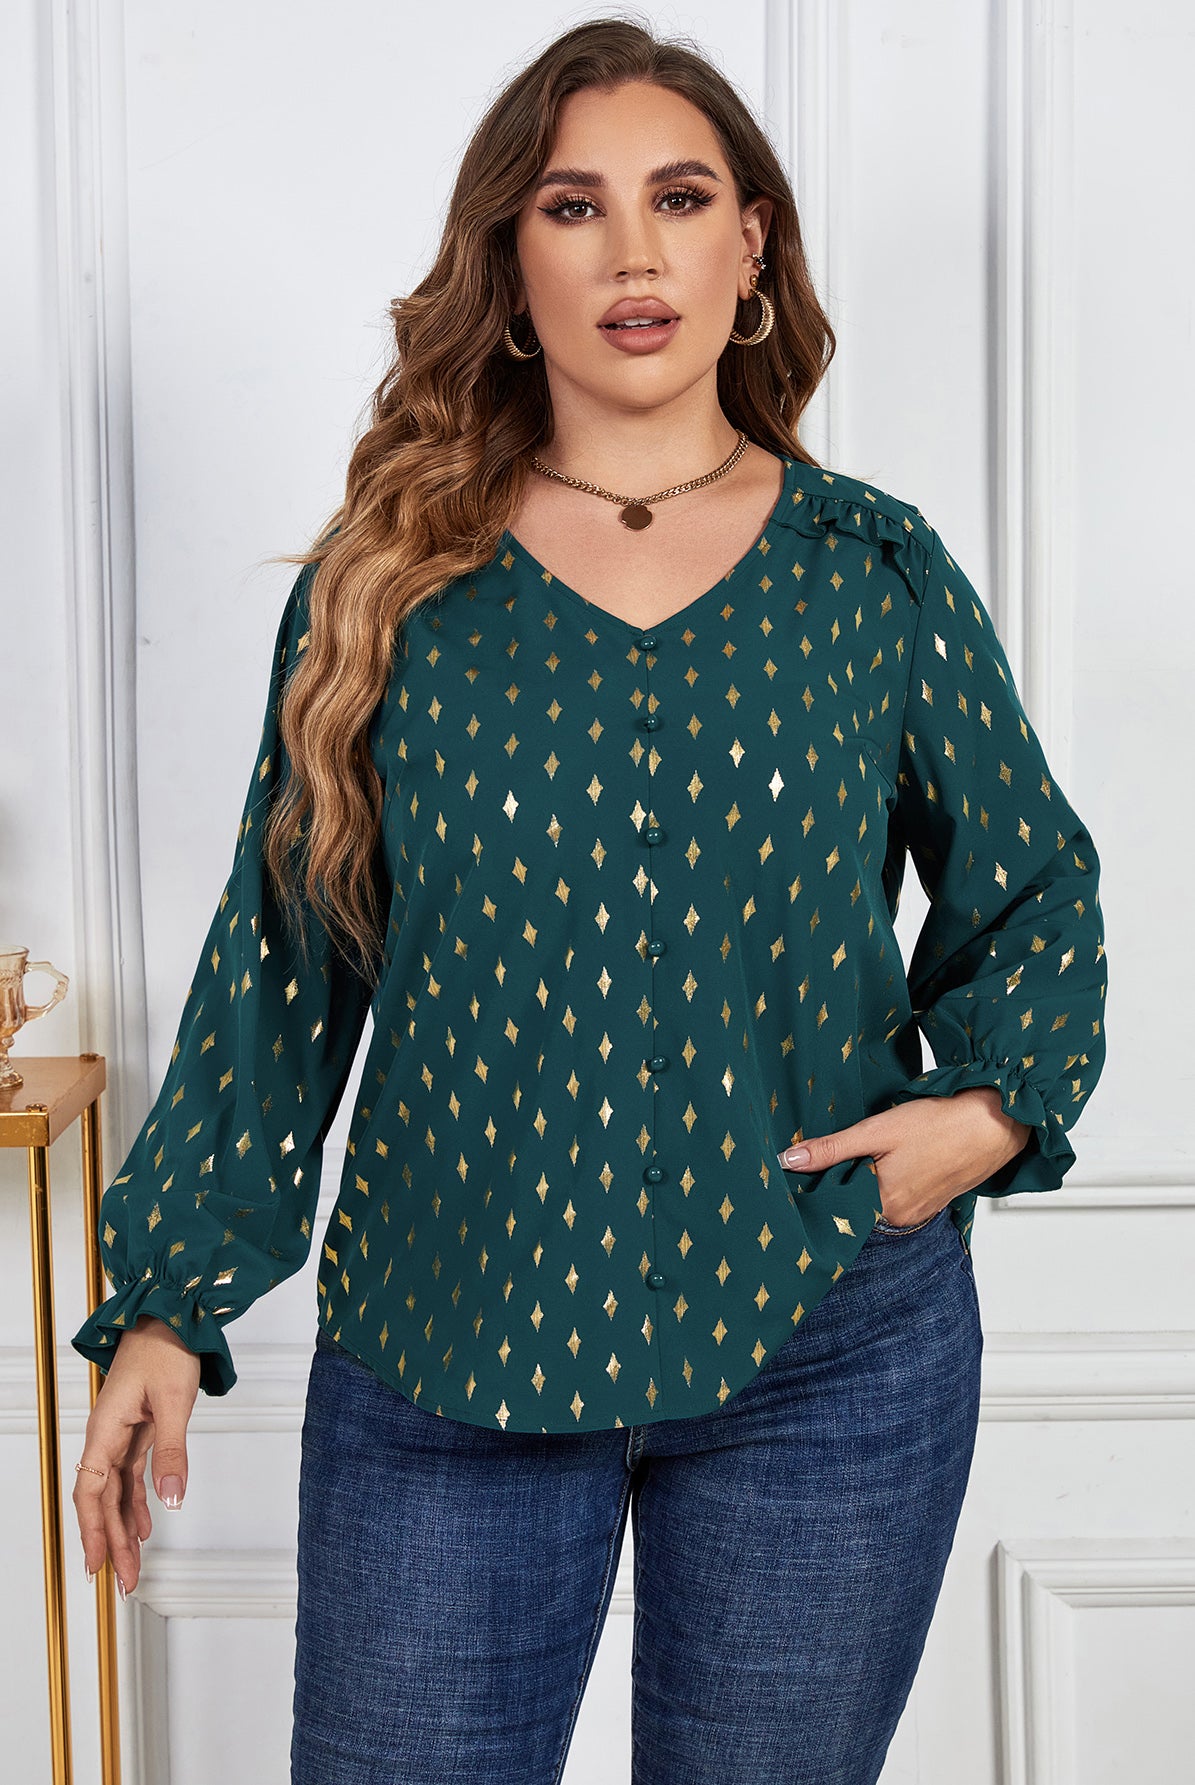 Light Gray Effortless Plus Size Printed Frill Trim Flounce Sleeve Blouse Plus Size Tops